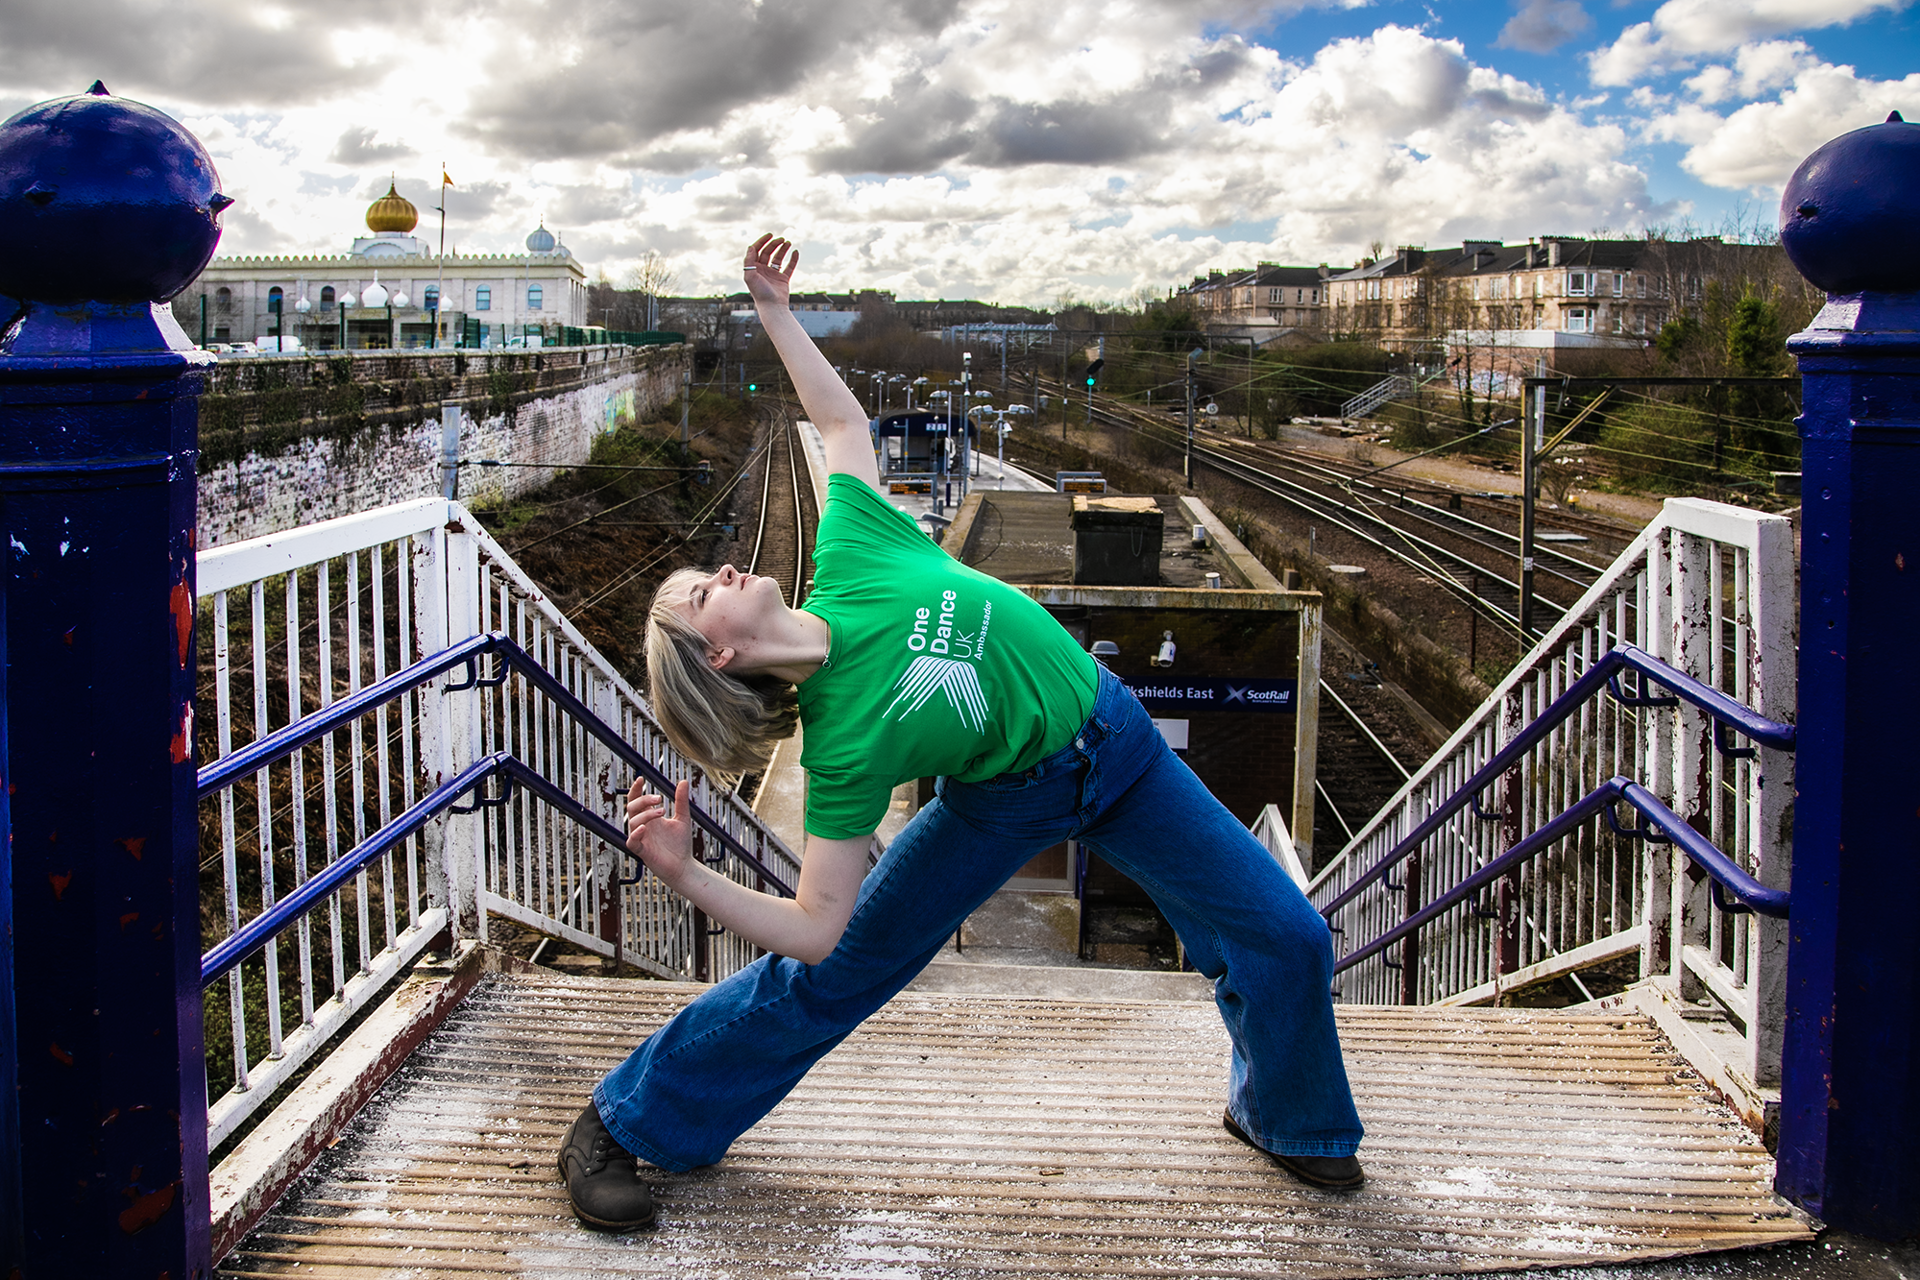 white blonde female lunging with arms high and arched back face pointed to the sky in front of train station platform. Wearing green dance ambassador tshirt and blue jeans